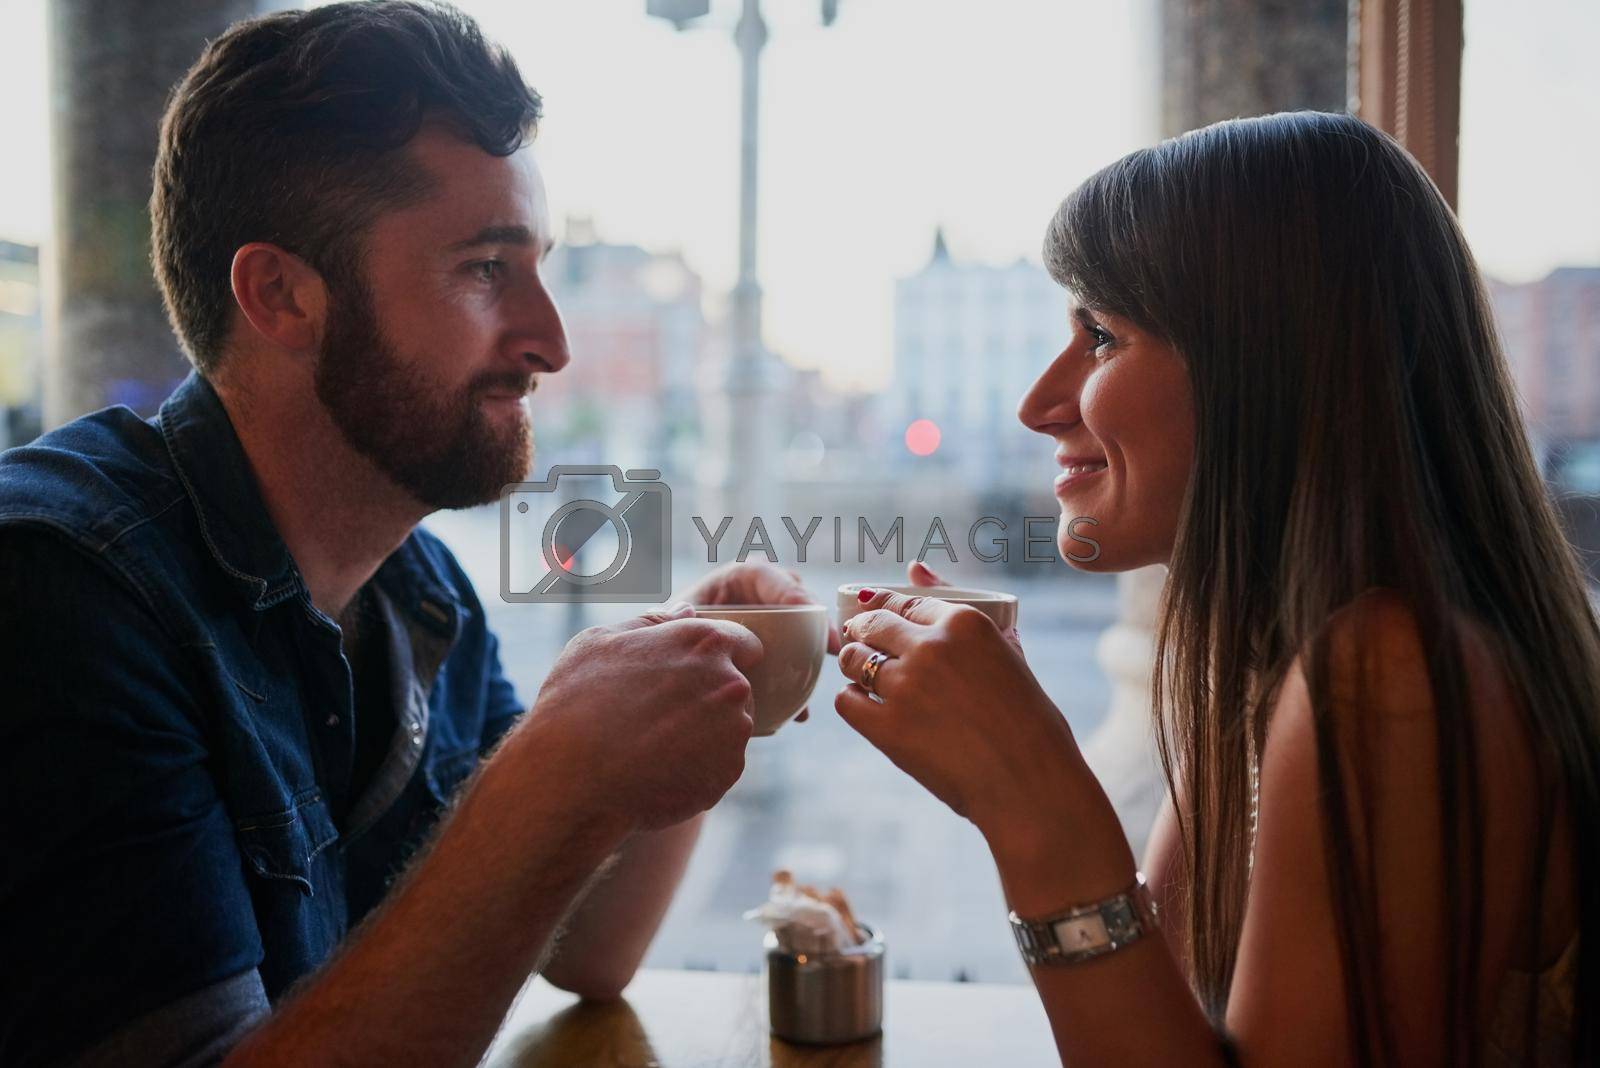 Royalty free image of This is the same coffee shop where they first met. an affectionate young couple sitting in a coffee shop while on a date. by YuriArcurs